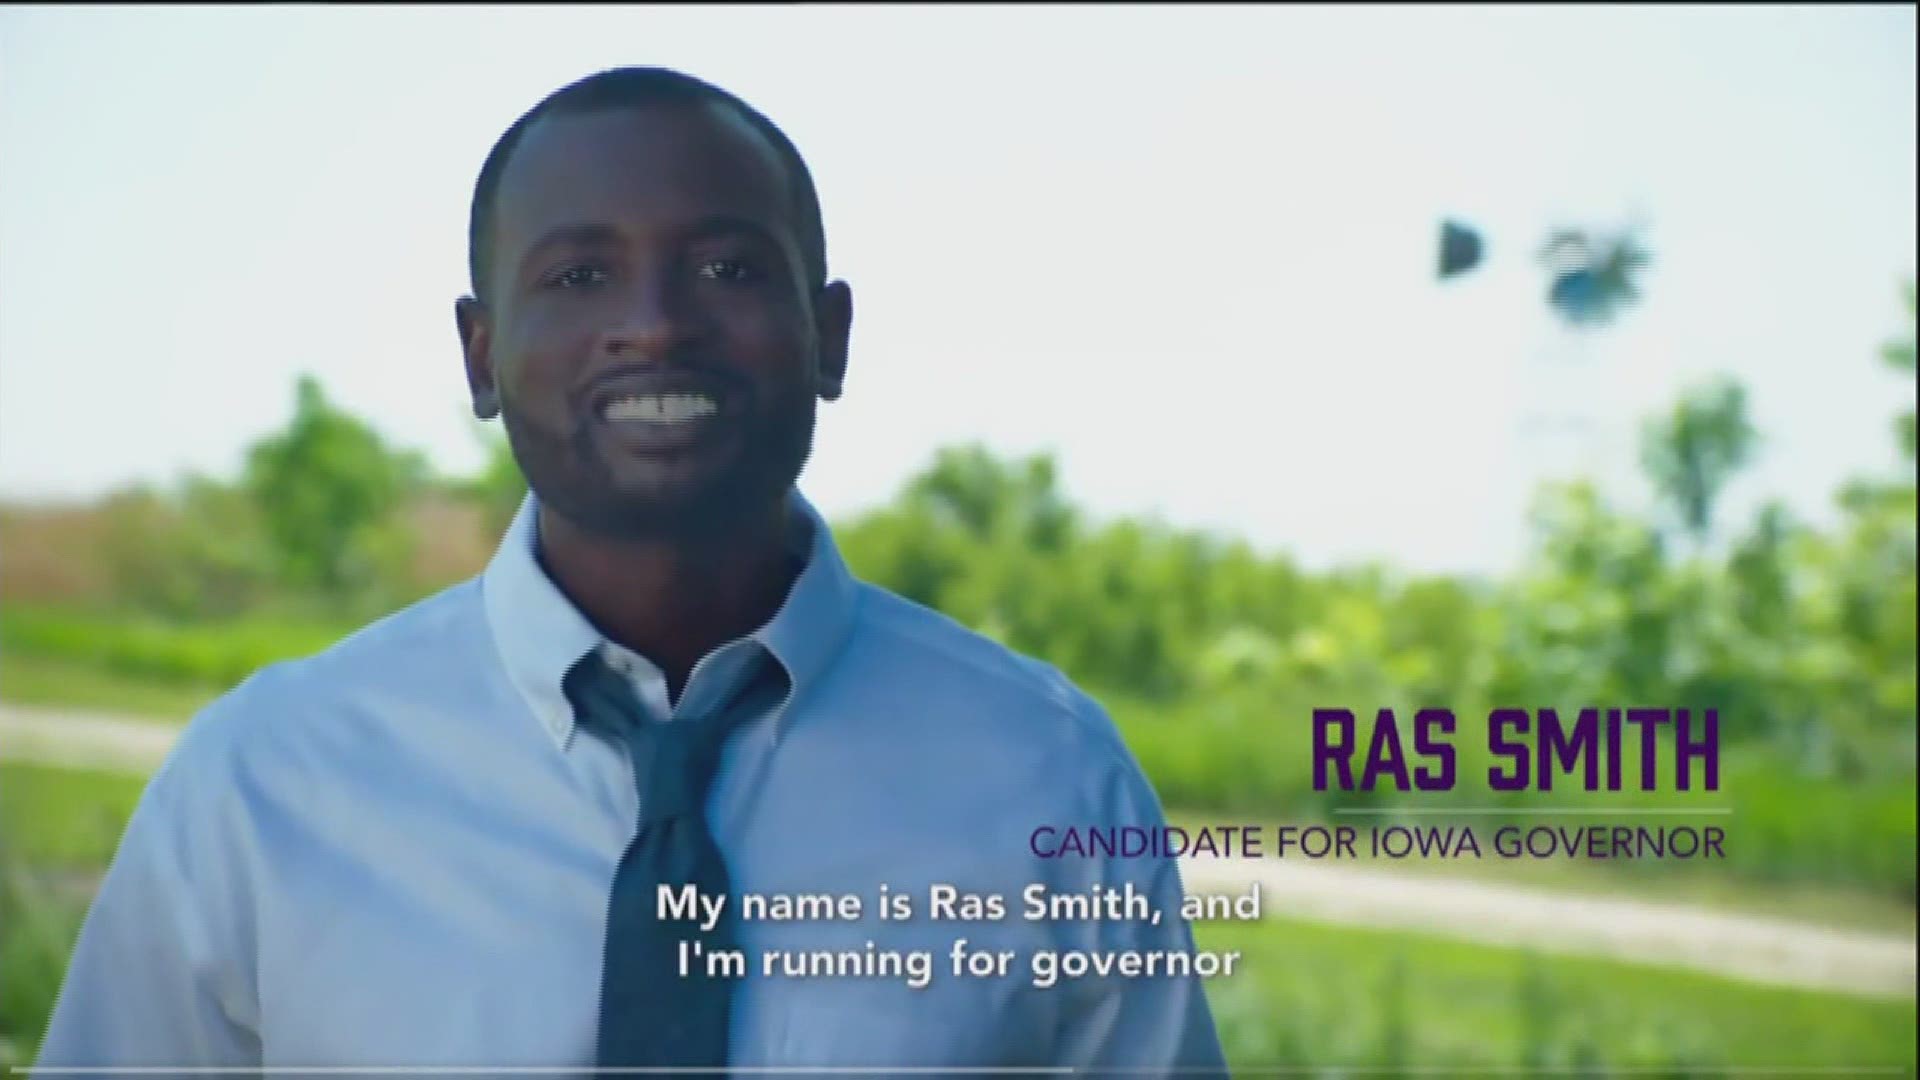 State Representative Ras Smith announced he is running for Governor.